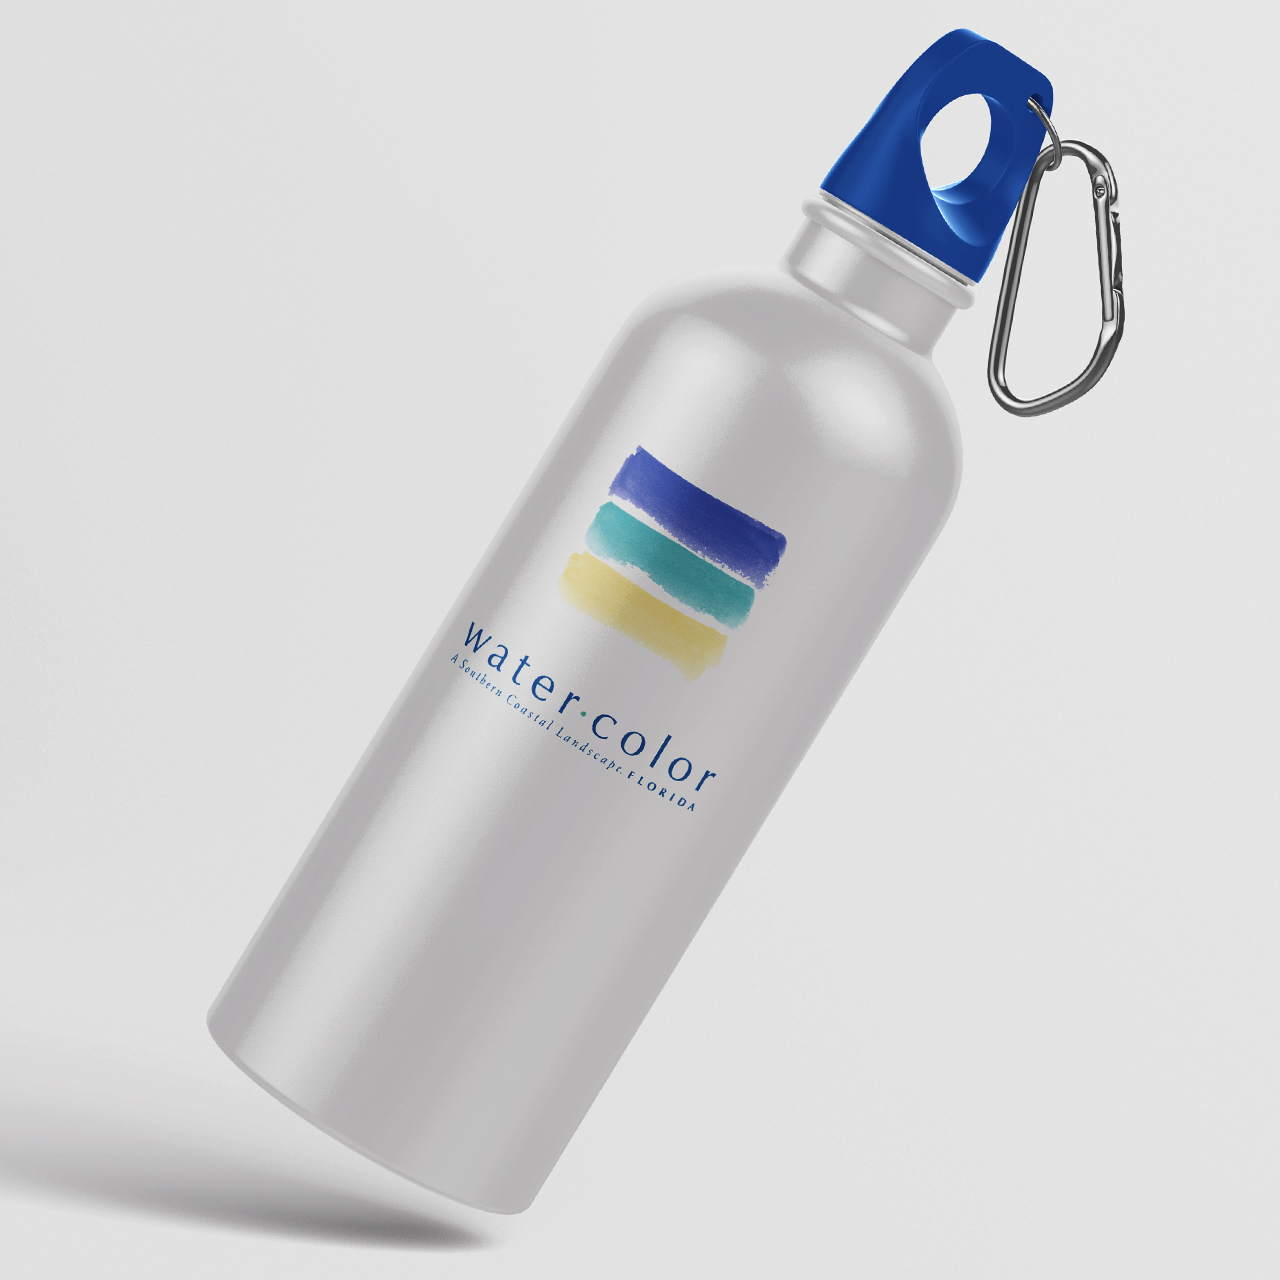 An image of a silver water bottle with the Water Color logo printed on it